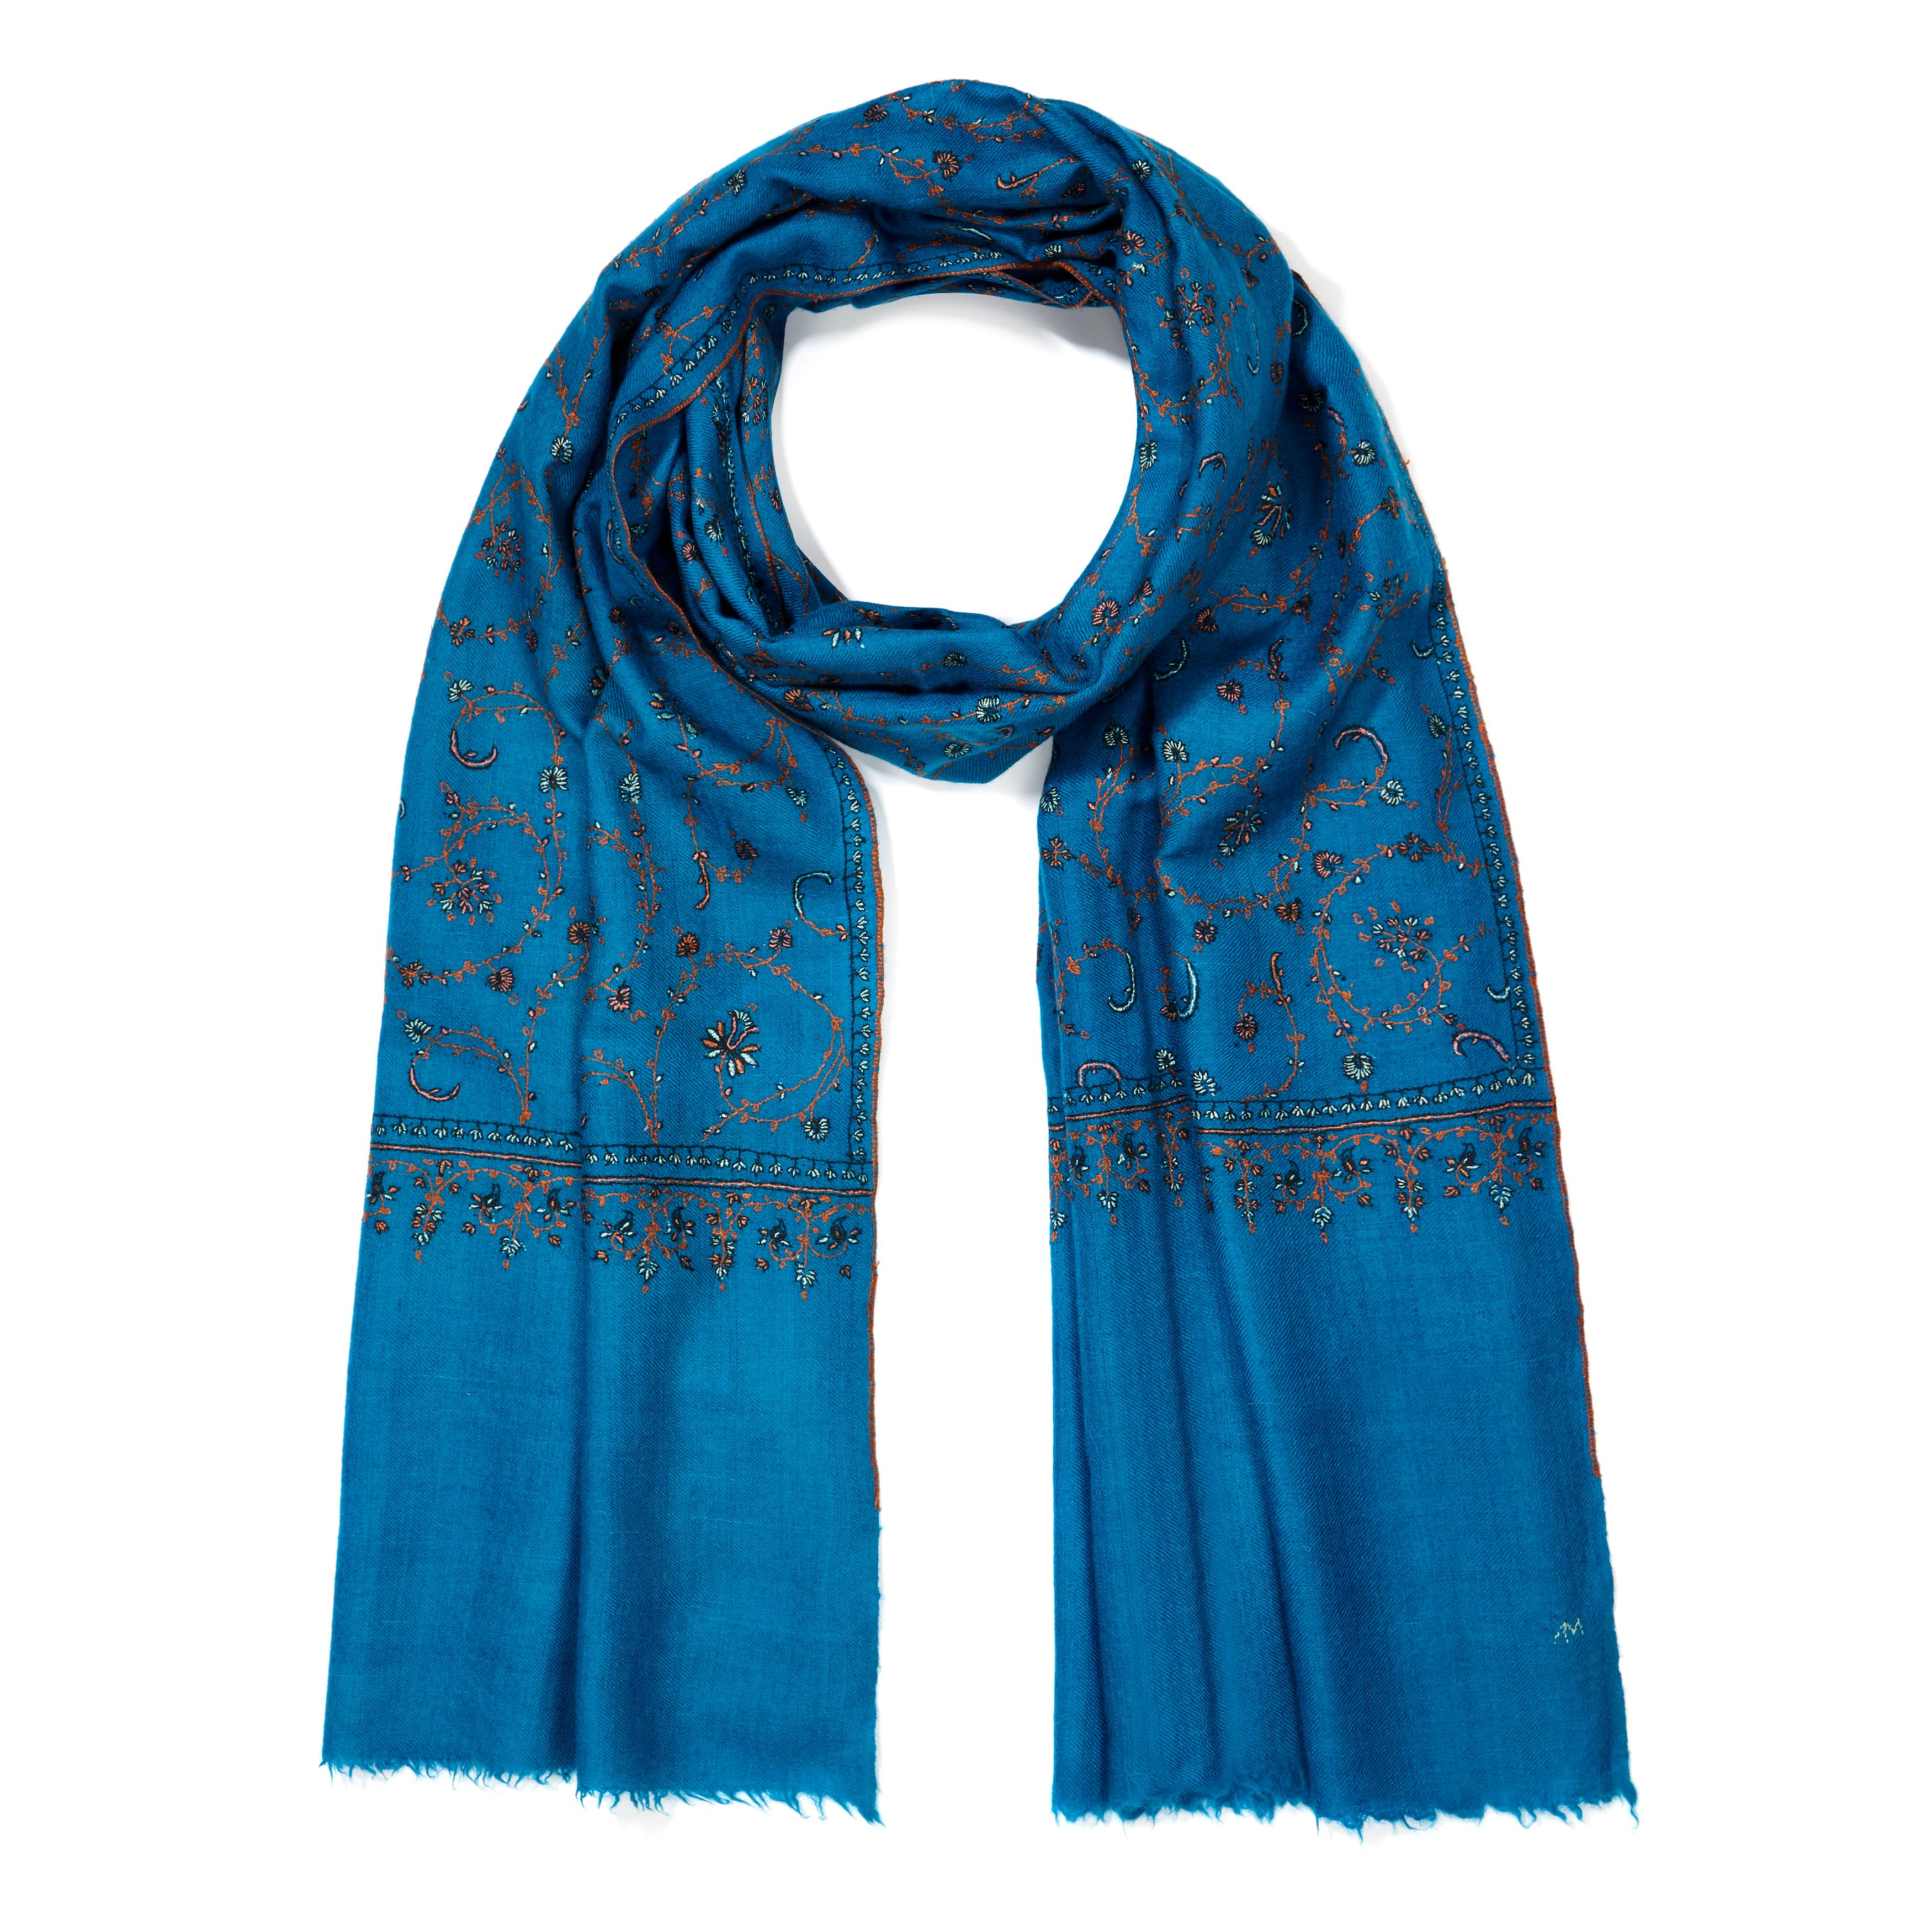 Women's or Men's Limited Edition Hand Embroidered Cashmere Shawl in Blue Made in Kashmir - Gift